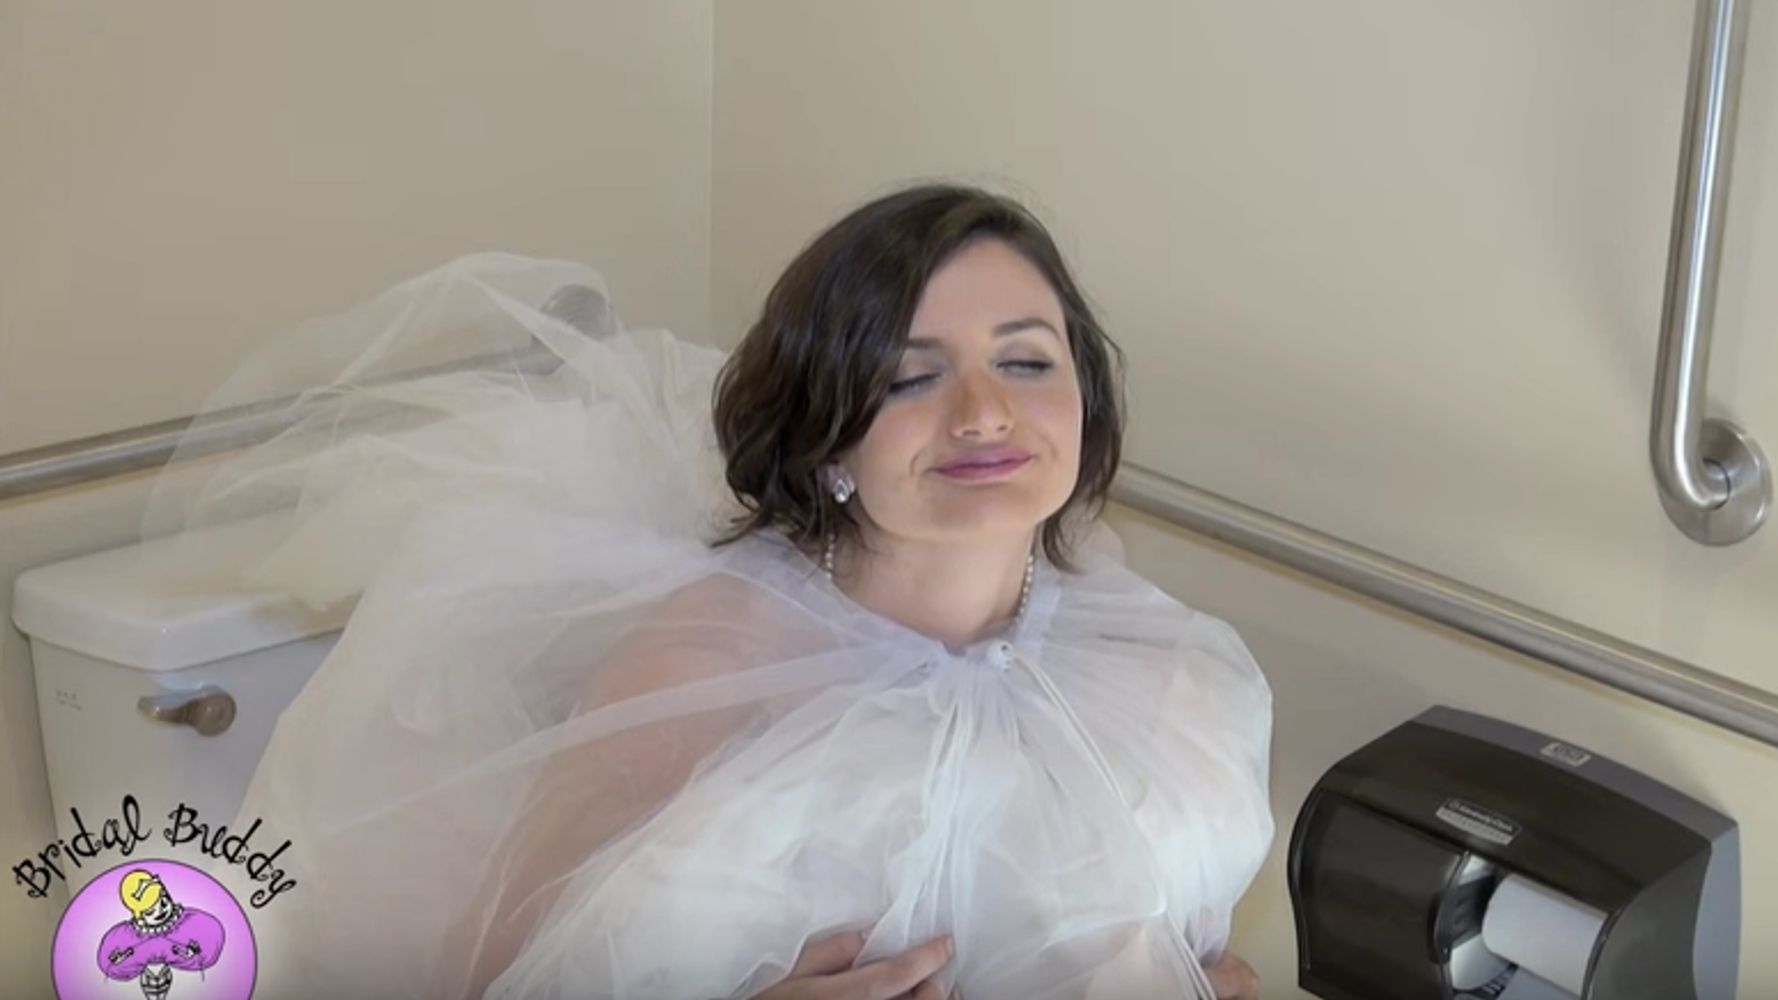 New Invention Revolutionizes The Way Brides Pee In A Wedding